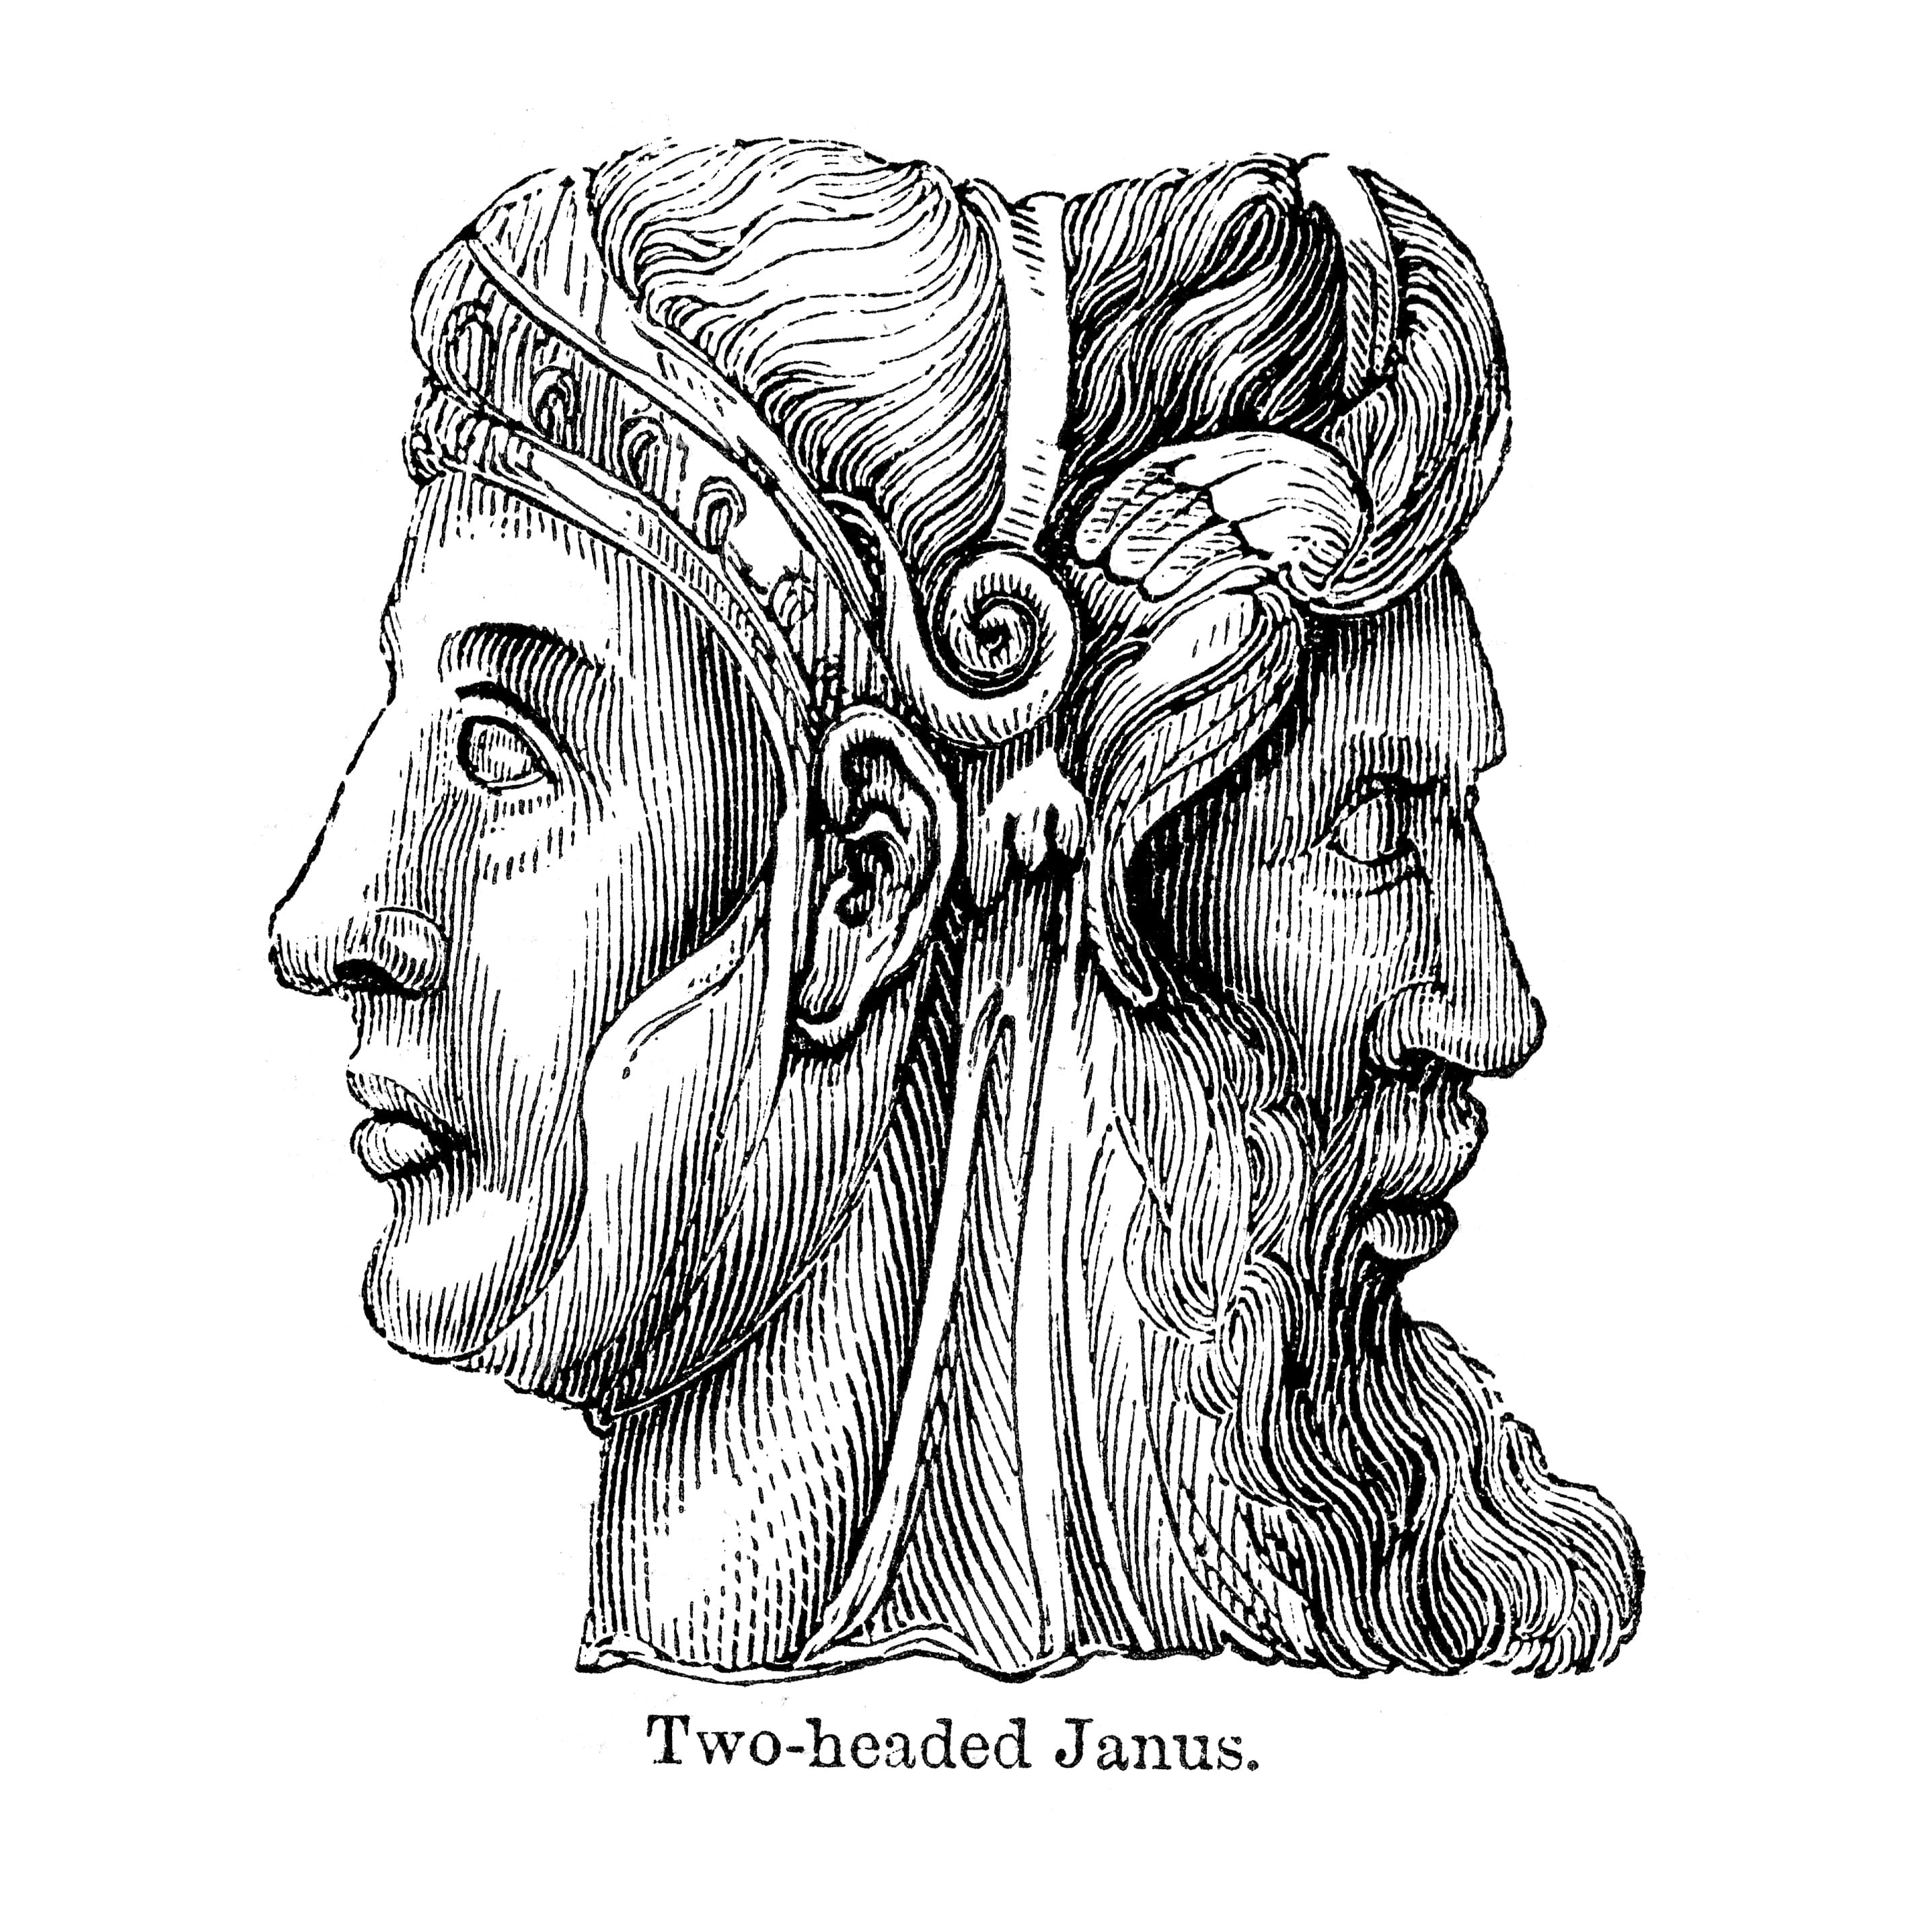 Vintage engraving of Janus. In ancient Roman religion and myth, Janus is the god of beginnings and transitions, thence also of gates, doors, passages, endings and time. He is usually depicted as having two faces, since he looks to the future and to the past